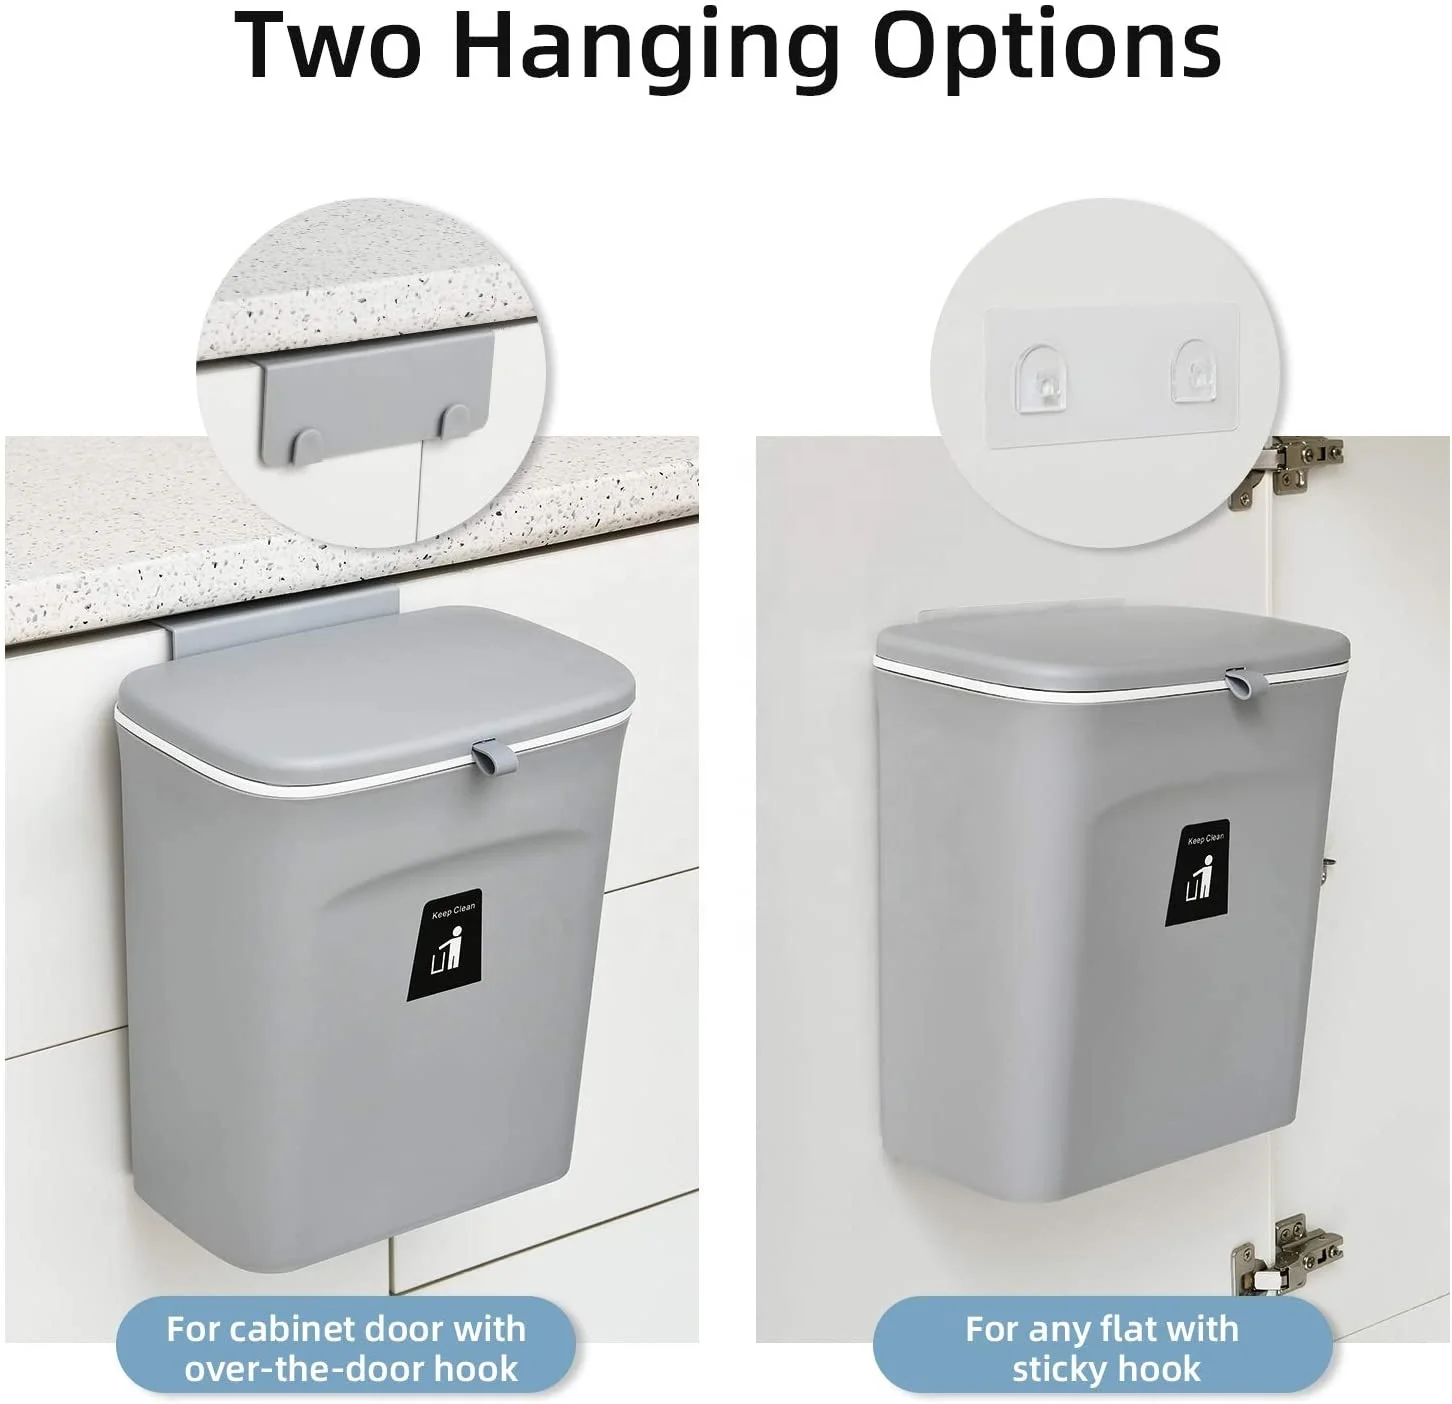 7L, Gray Kitchen Cabinet Door Hanging Trash Can with Lid 2.4 Gal Small Under Sink Garbage Can for Restroom RV Kitchen Trash Bin Plastic Bathroom Wall Mounted Counter Waste Compost Bin 